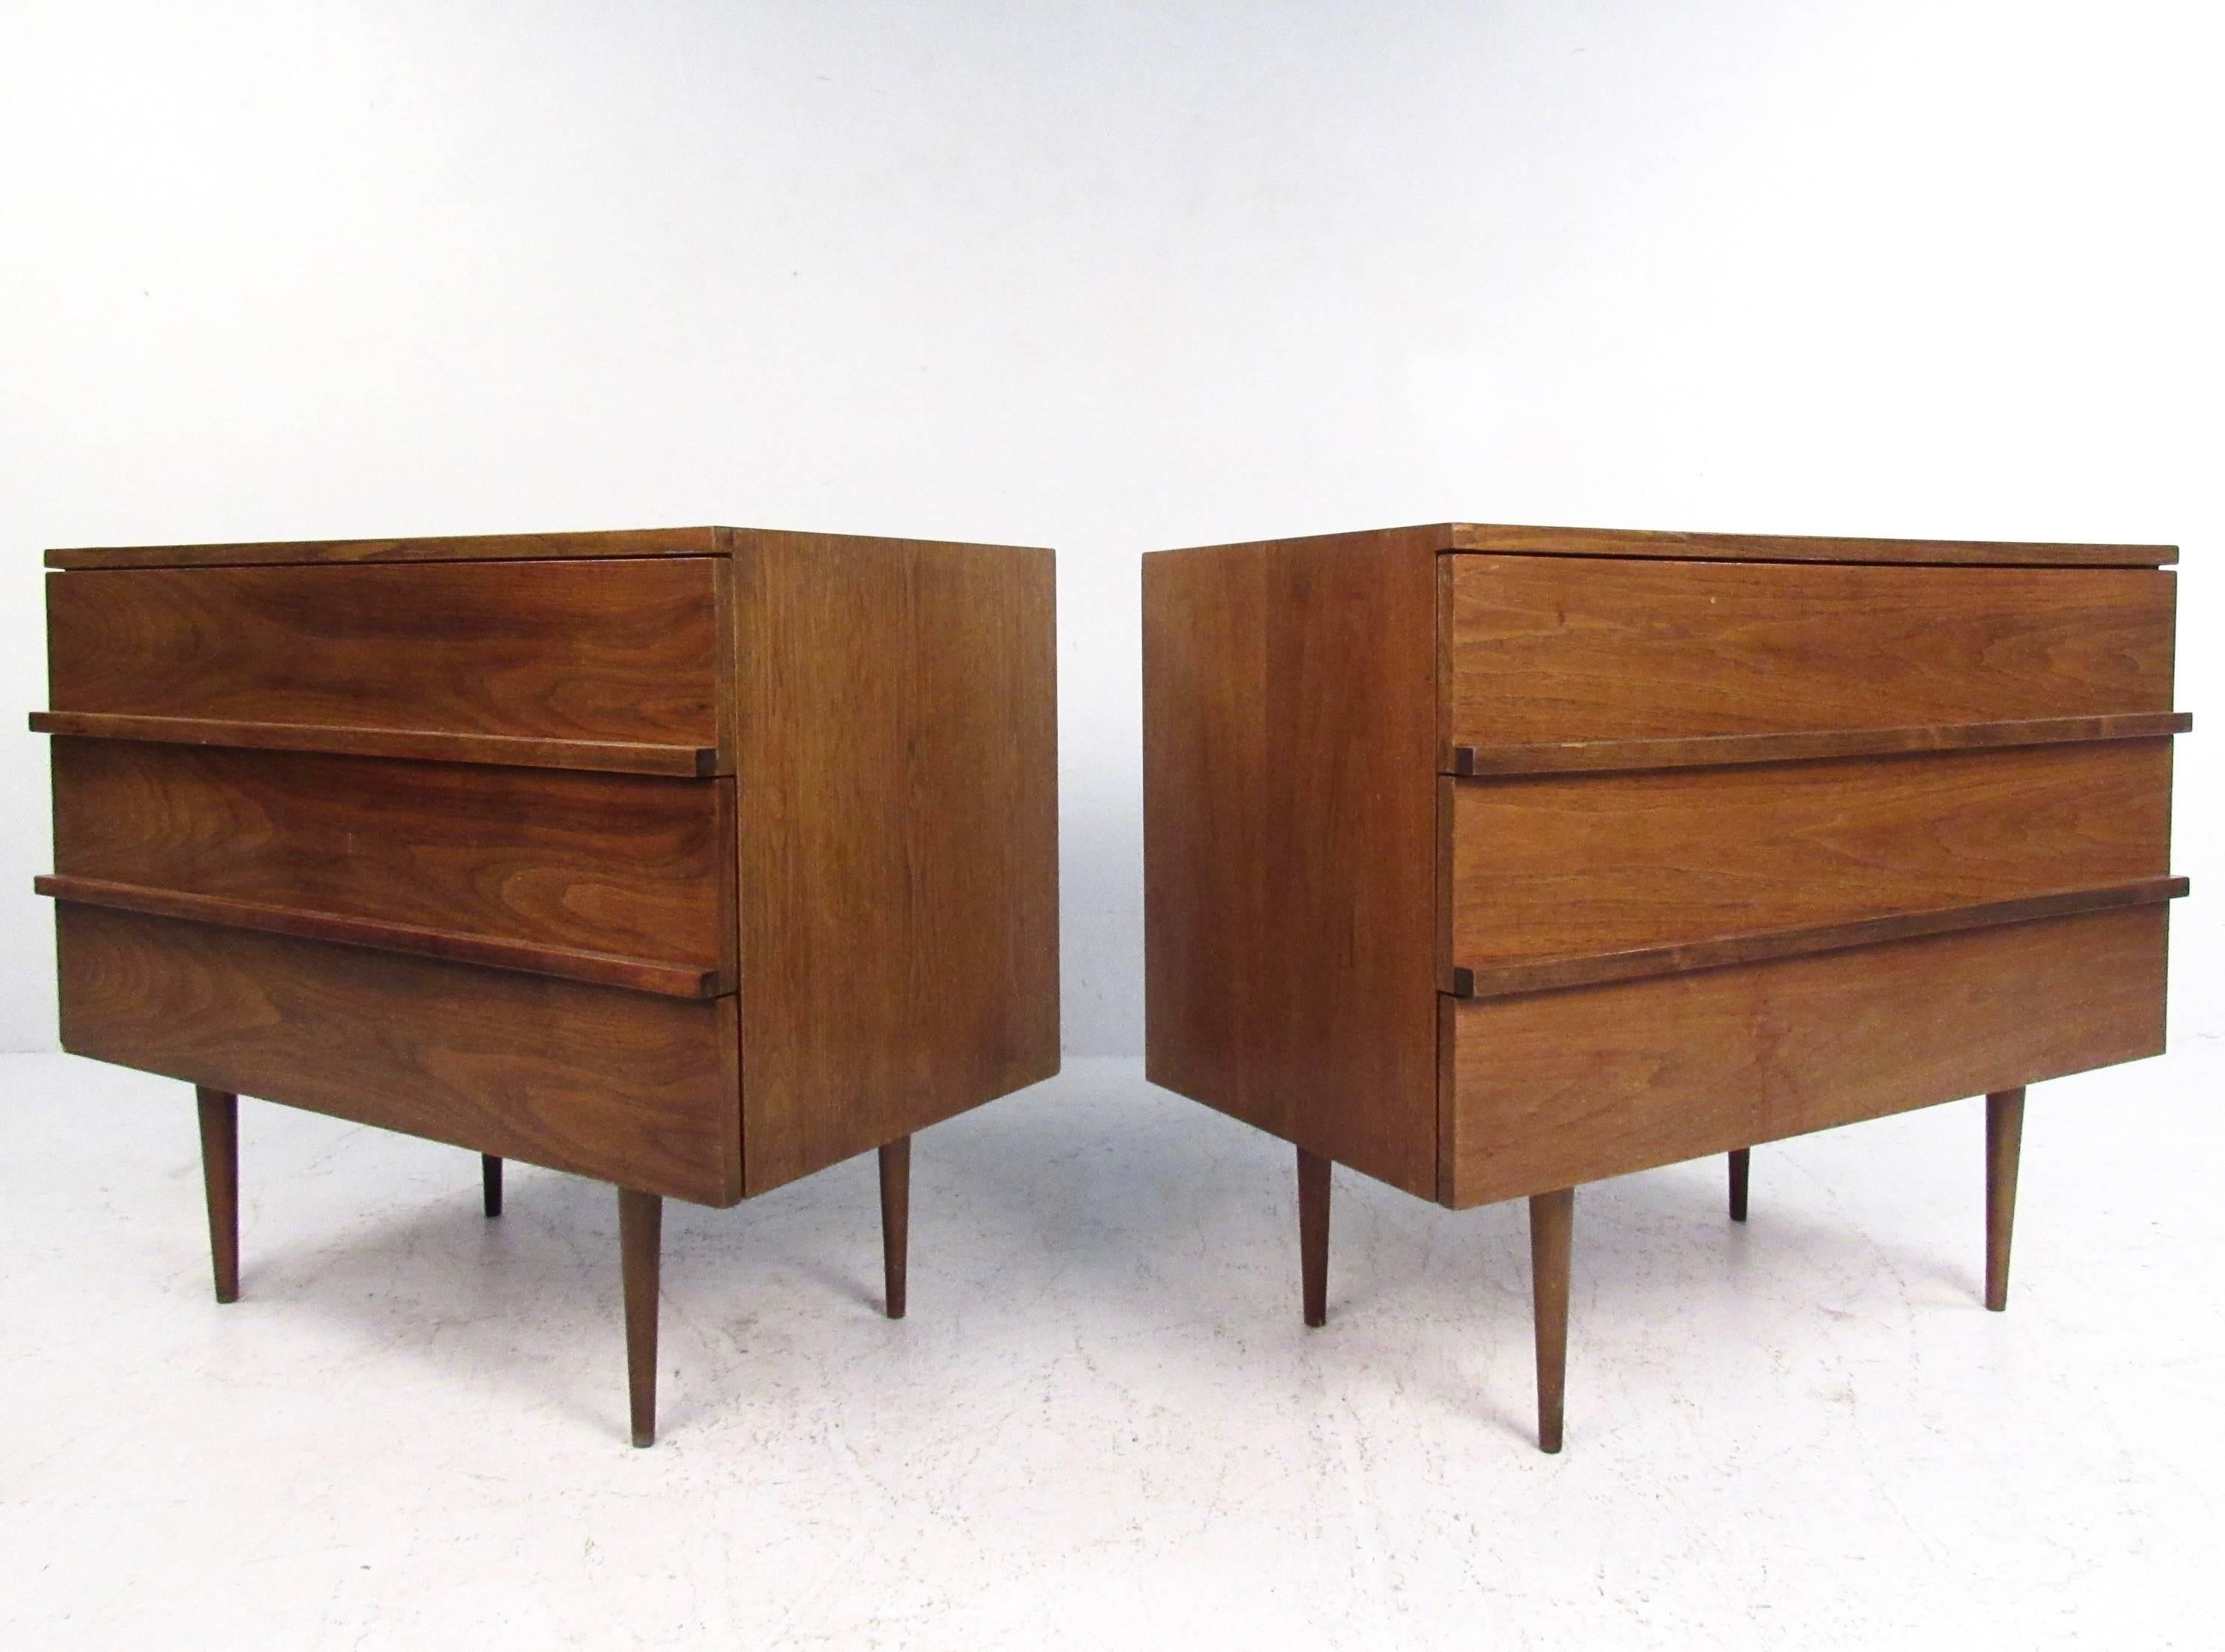 This pair of vintage modern walnut dressers make an excellent addition to any interior in need of stylish storage. Thin and tall tapered legs offset the wide design and robust walnut finish. Carved drawer pulls and plenty of storage space make these